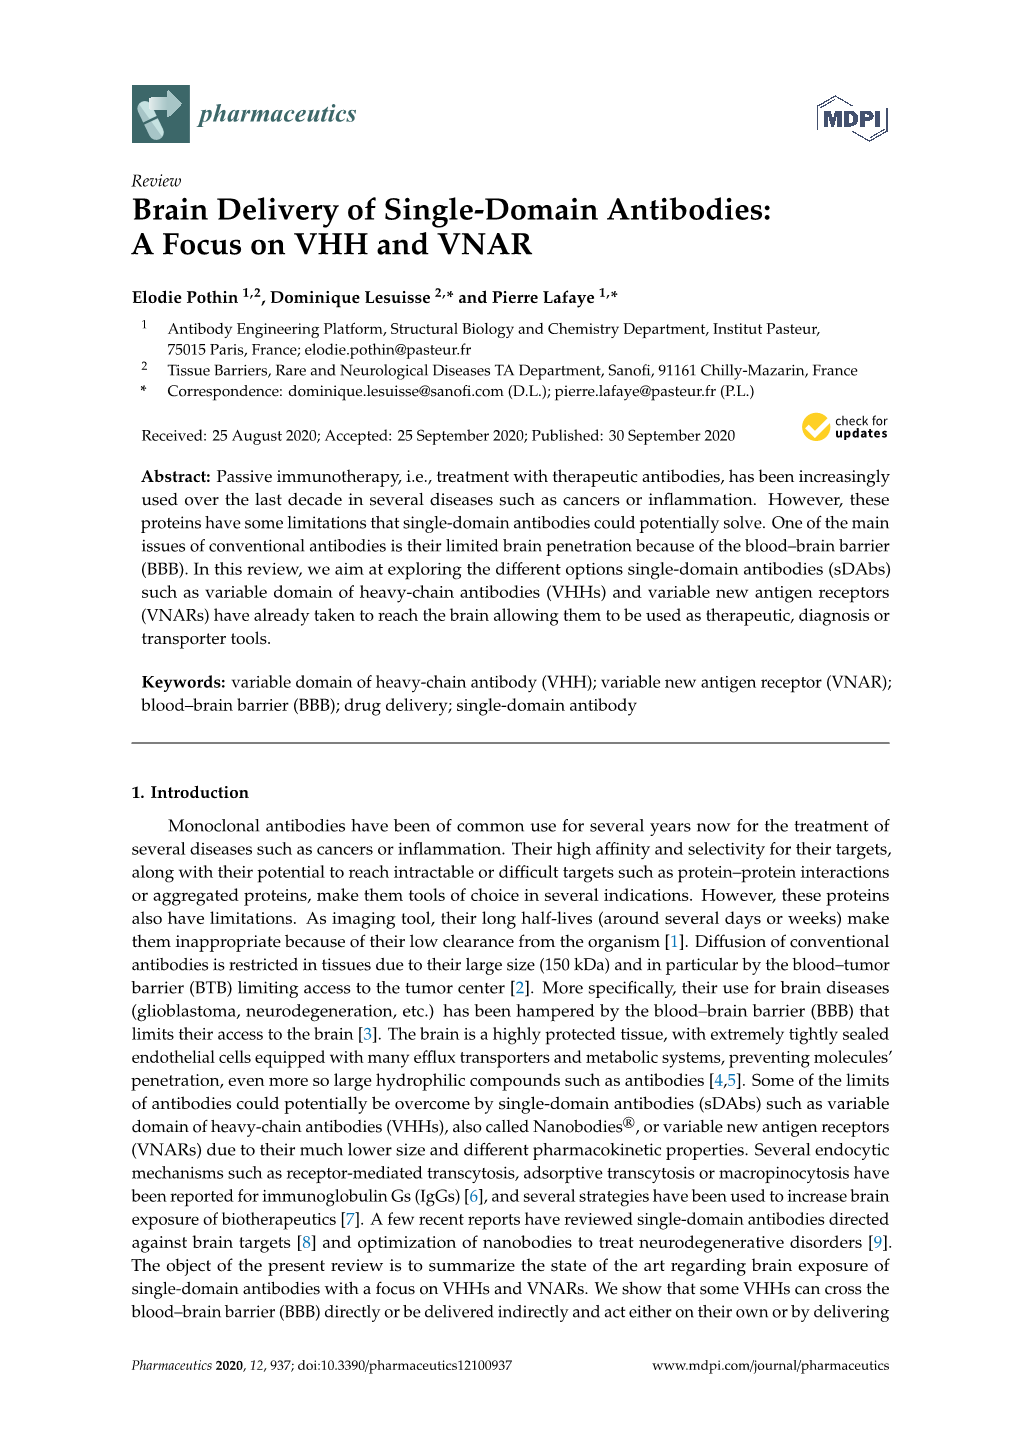 Brain Delivery of Single-Domain Antibodies: a Focus on VHH and VNAR